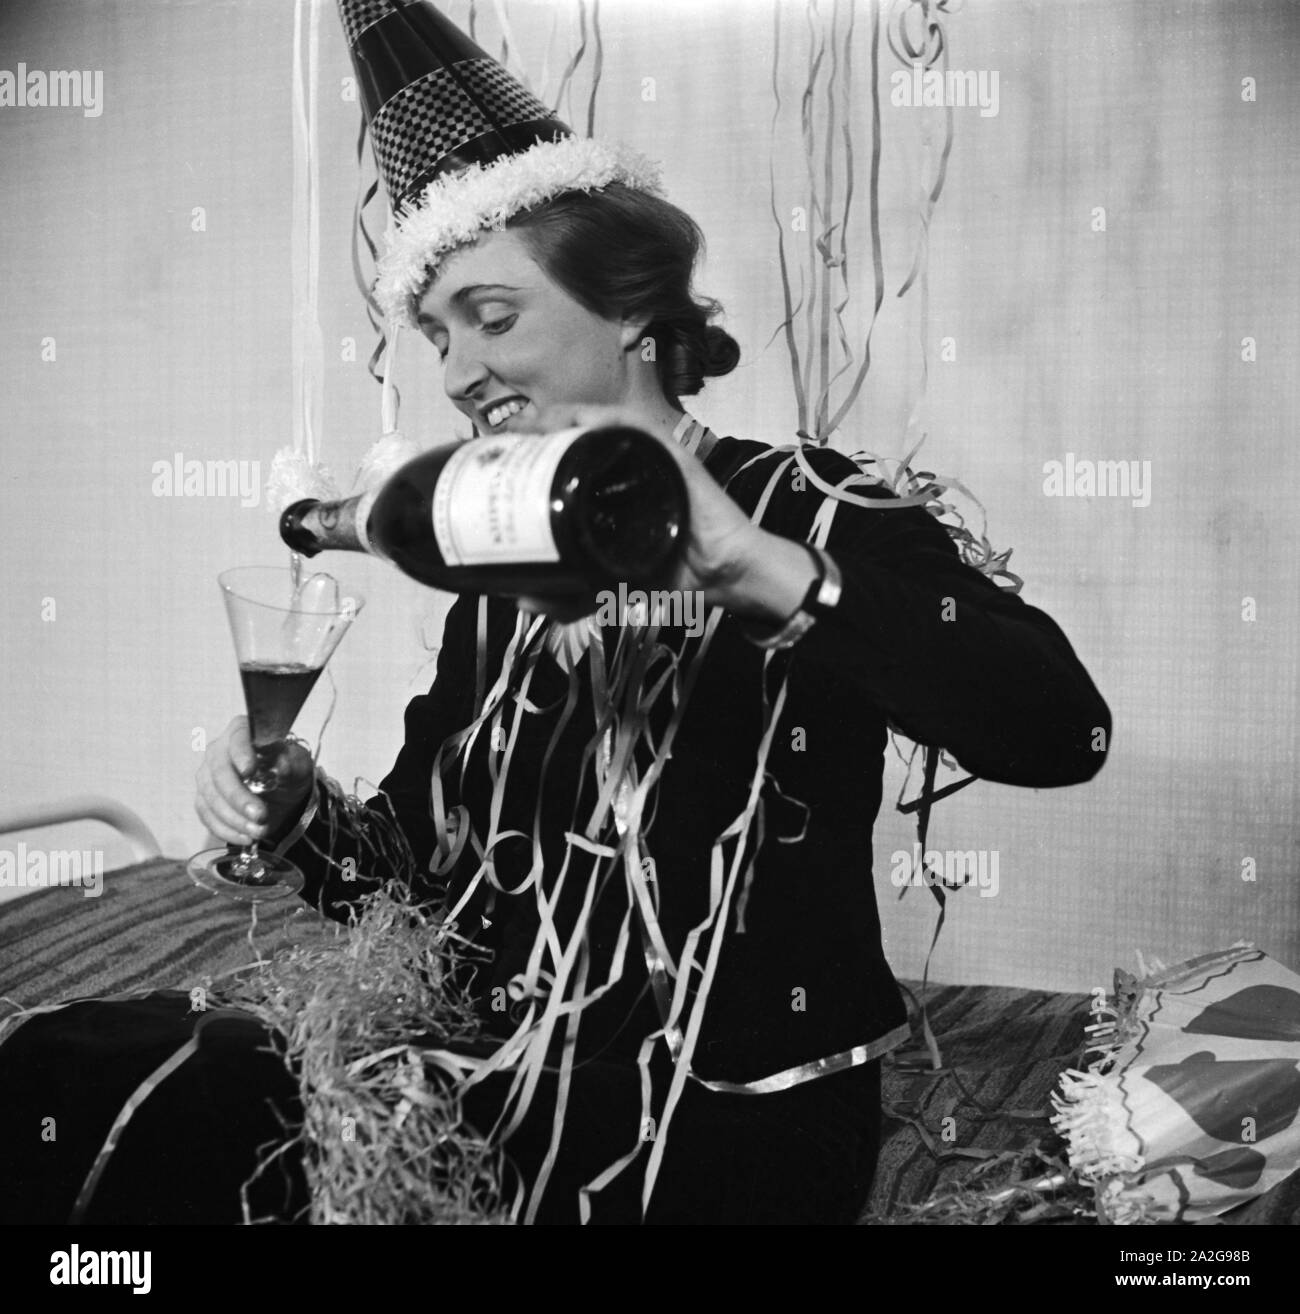 Gast einer Silvesterparty, Deutsches Reich 1930er Jahre. Guest of a New Year's Eve party, Germany 1930s. Stock Photo